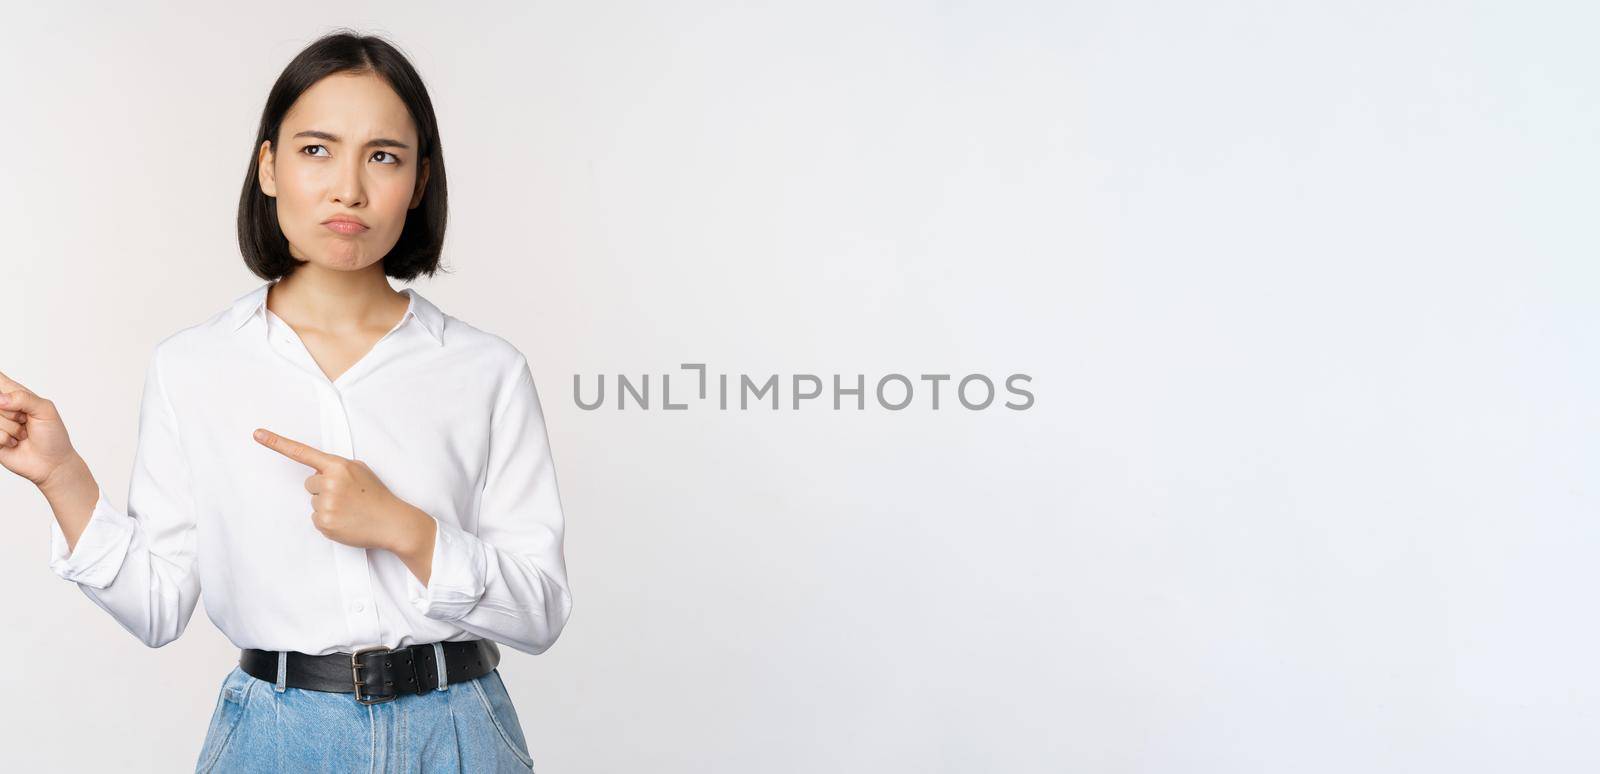 Disappointed, sad young asian woman pointing and looking left with upset, sulking face expression, standing over white background.